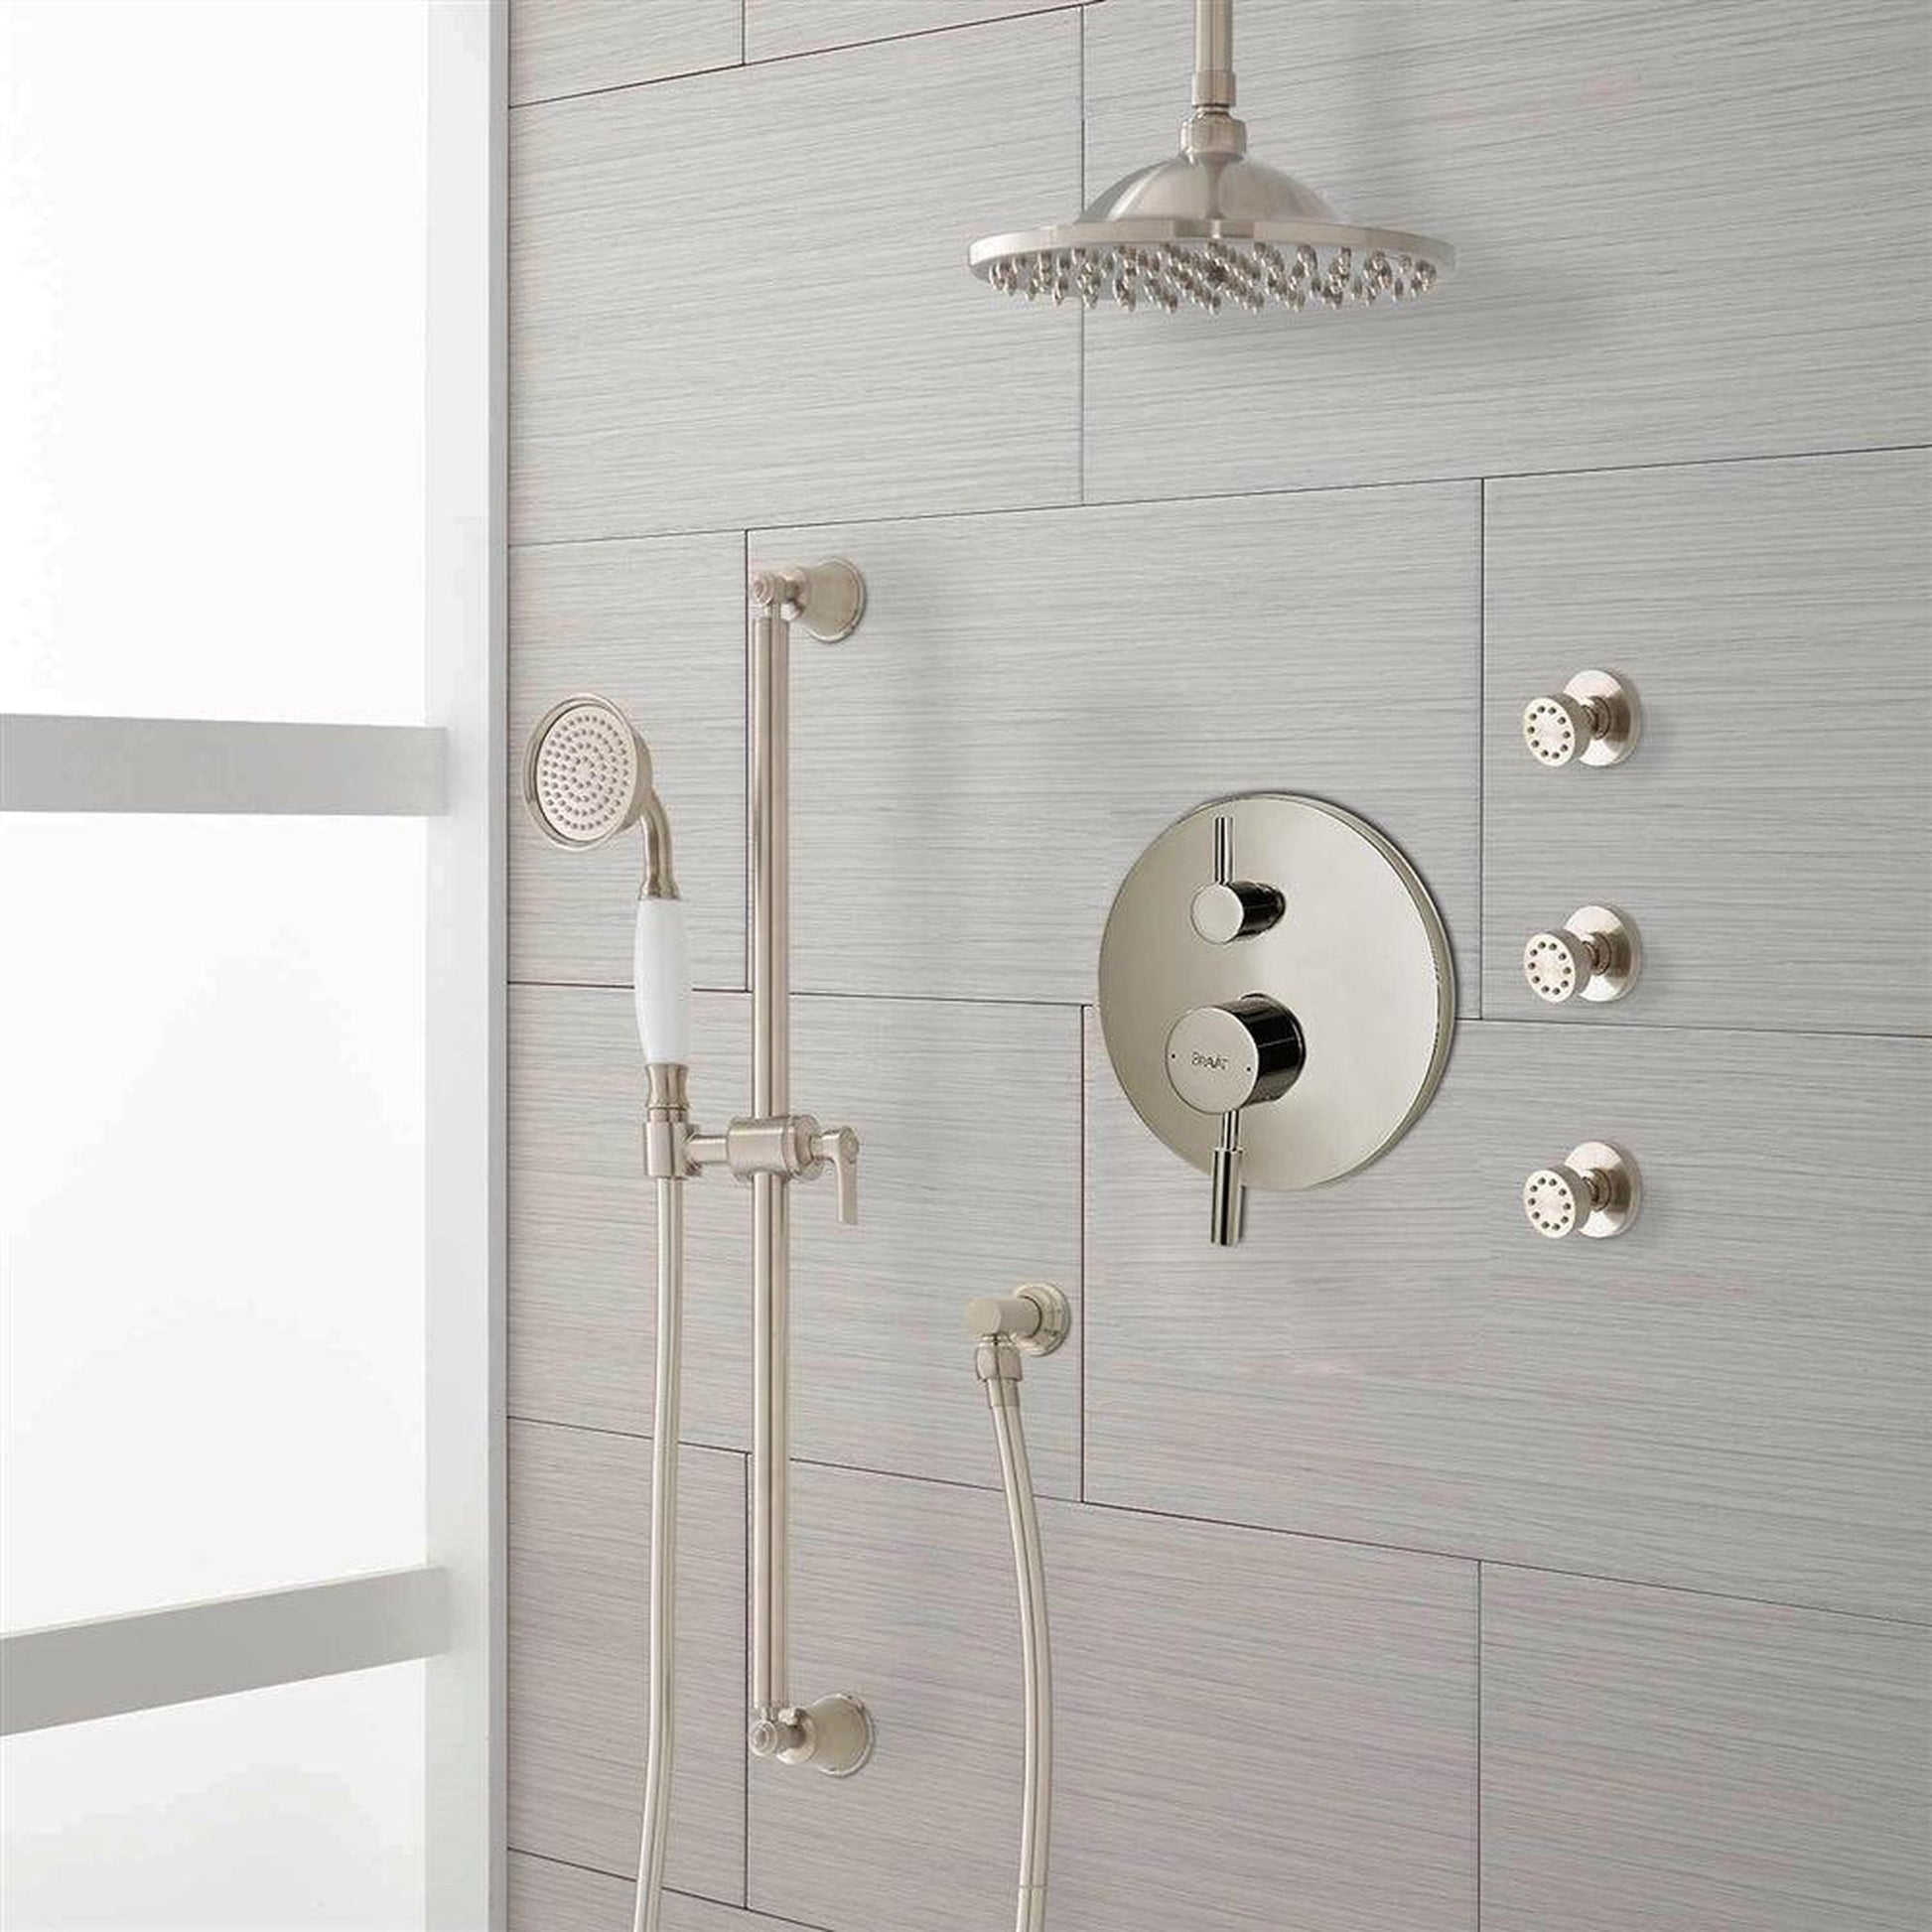 FontanaShowers Deluxe Designers 12" Brushed Nickel Round Dual Shower Head Rainfall Shower System With 3-Jet Body Sprays and Hand Shower